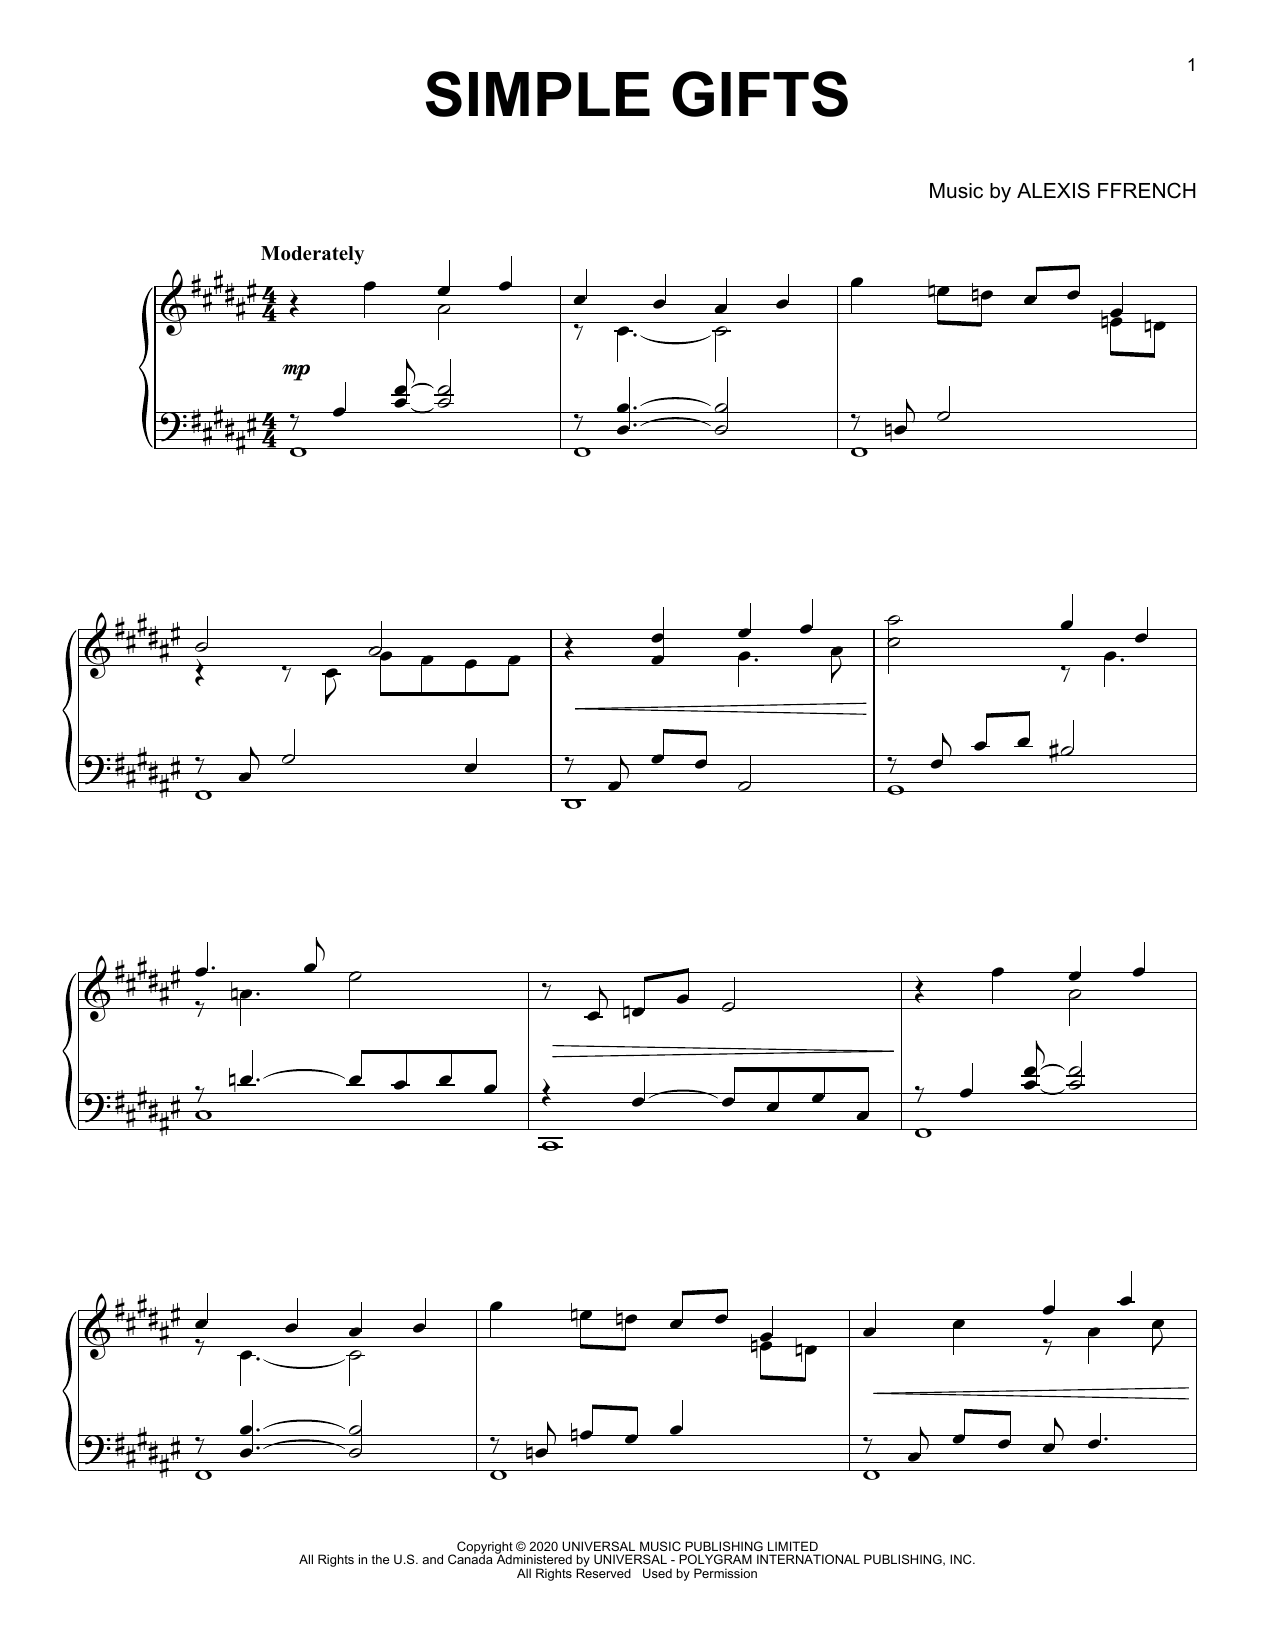 Download Alexis Ffrench Simple Gifts Sheet Music